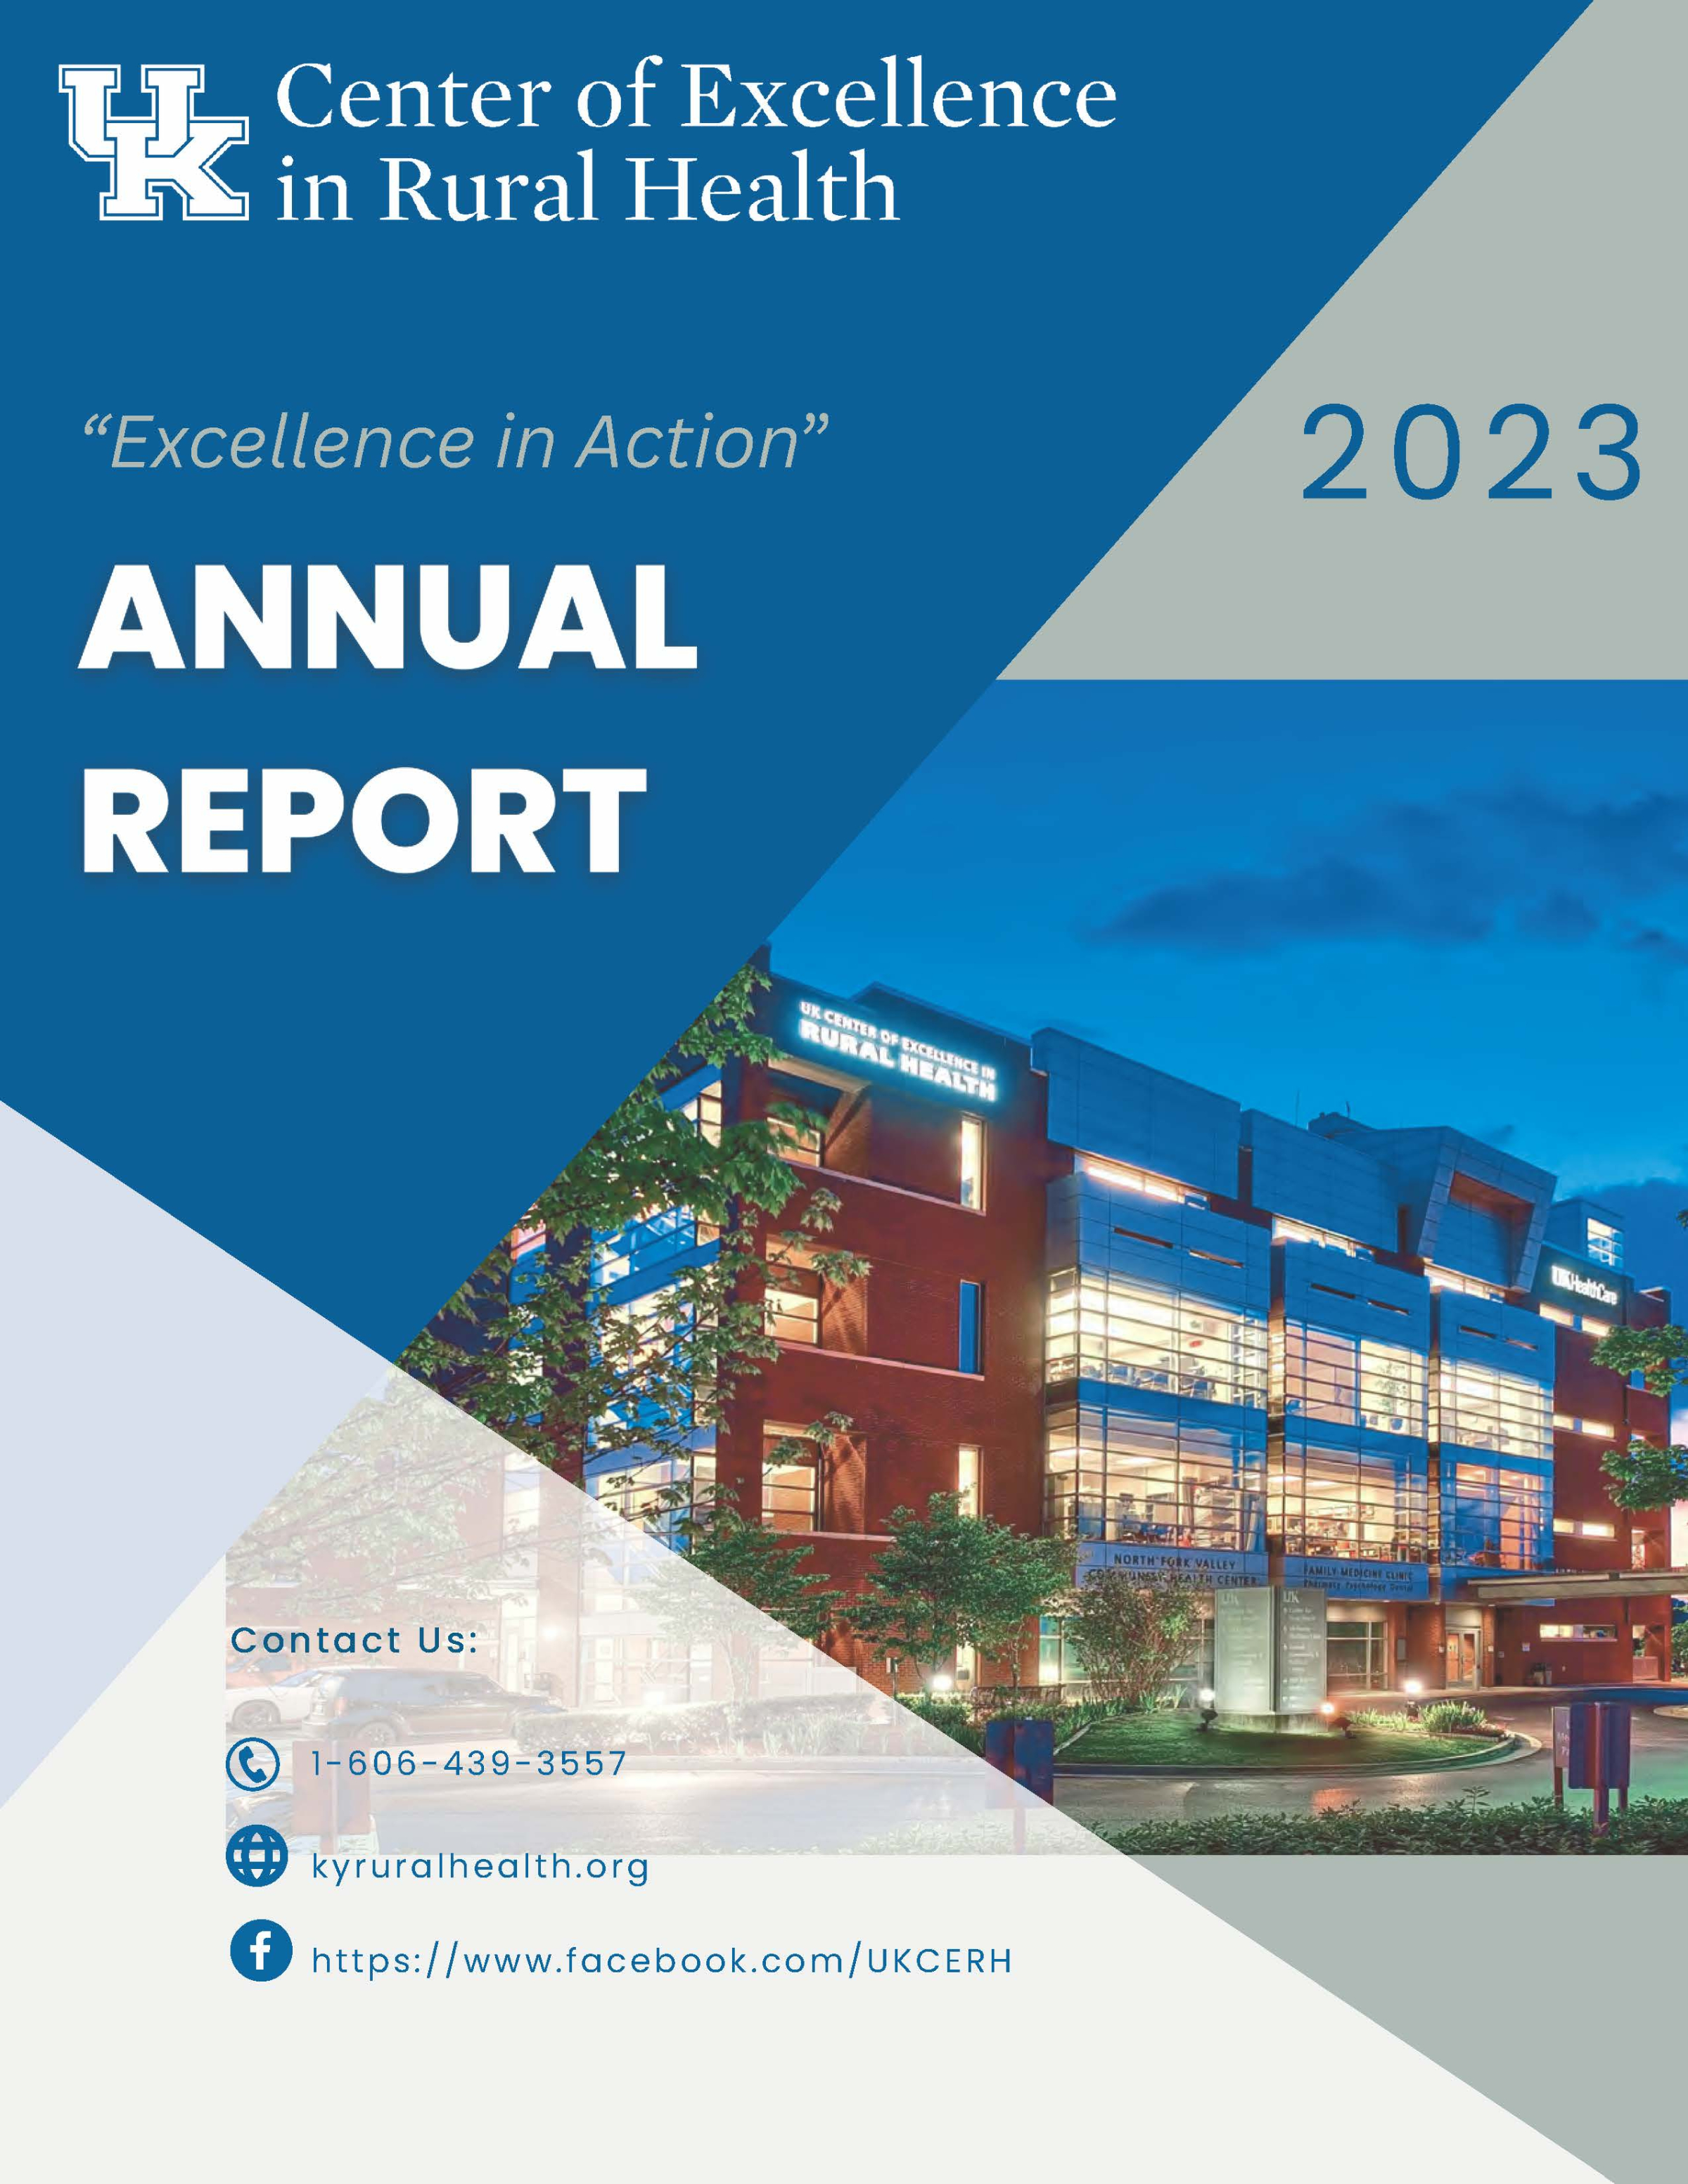 Photo of the cover of the 2023 annual report